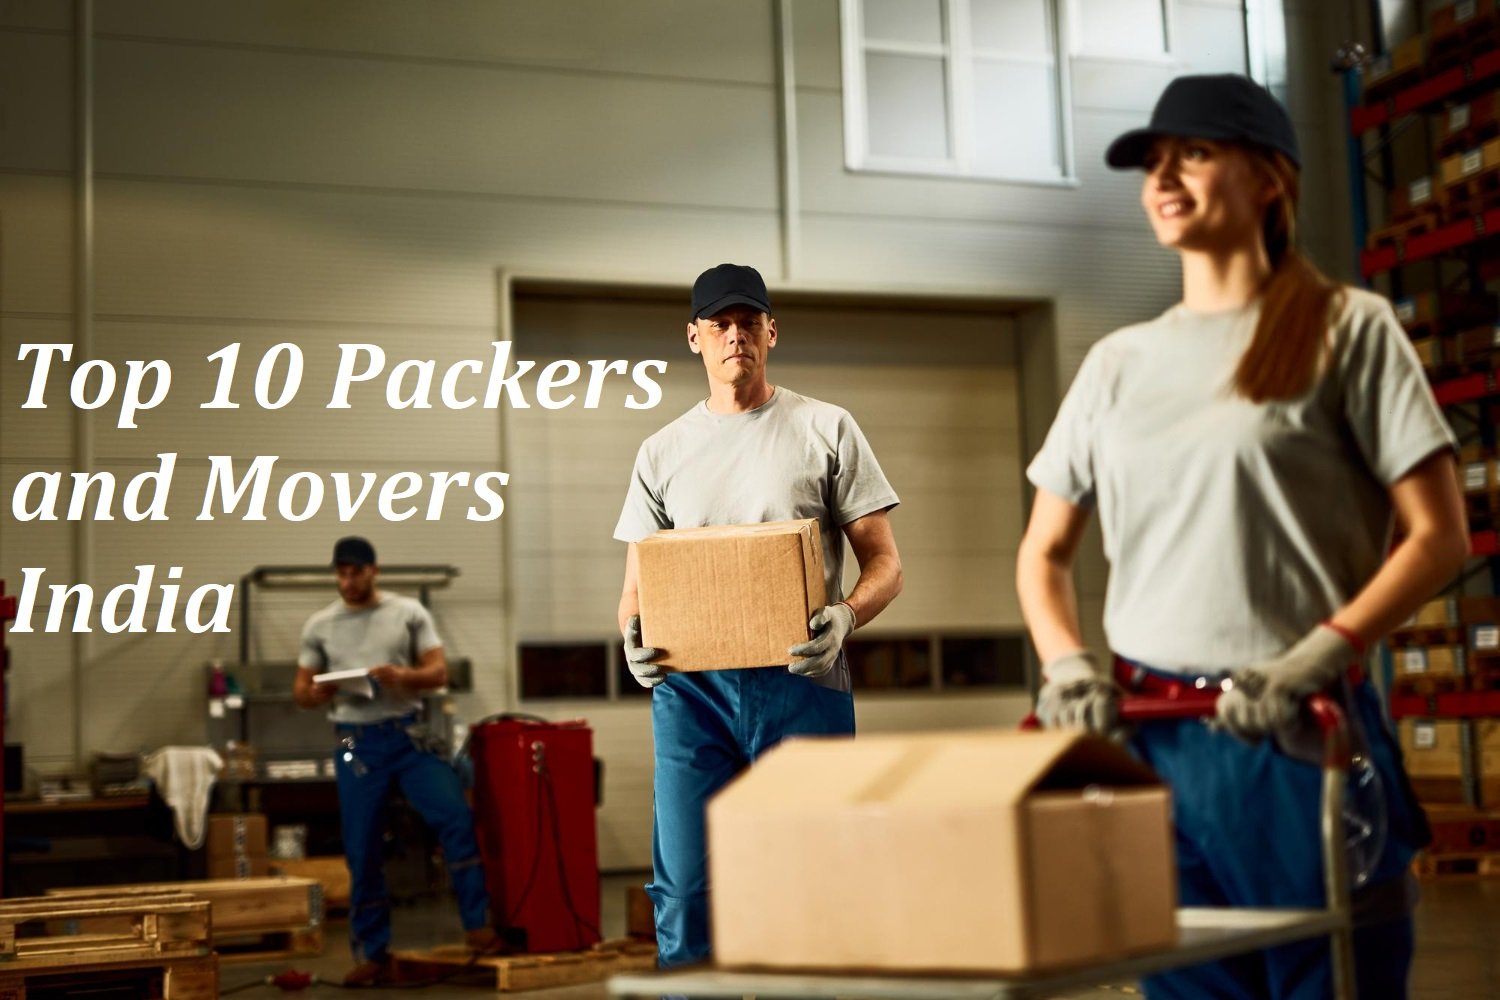 Top 10 Packers and Movers in India with benifits